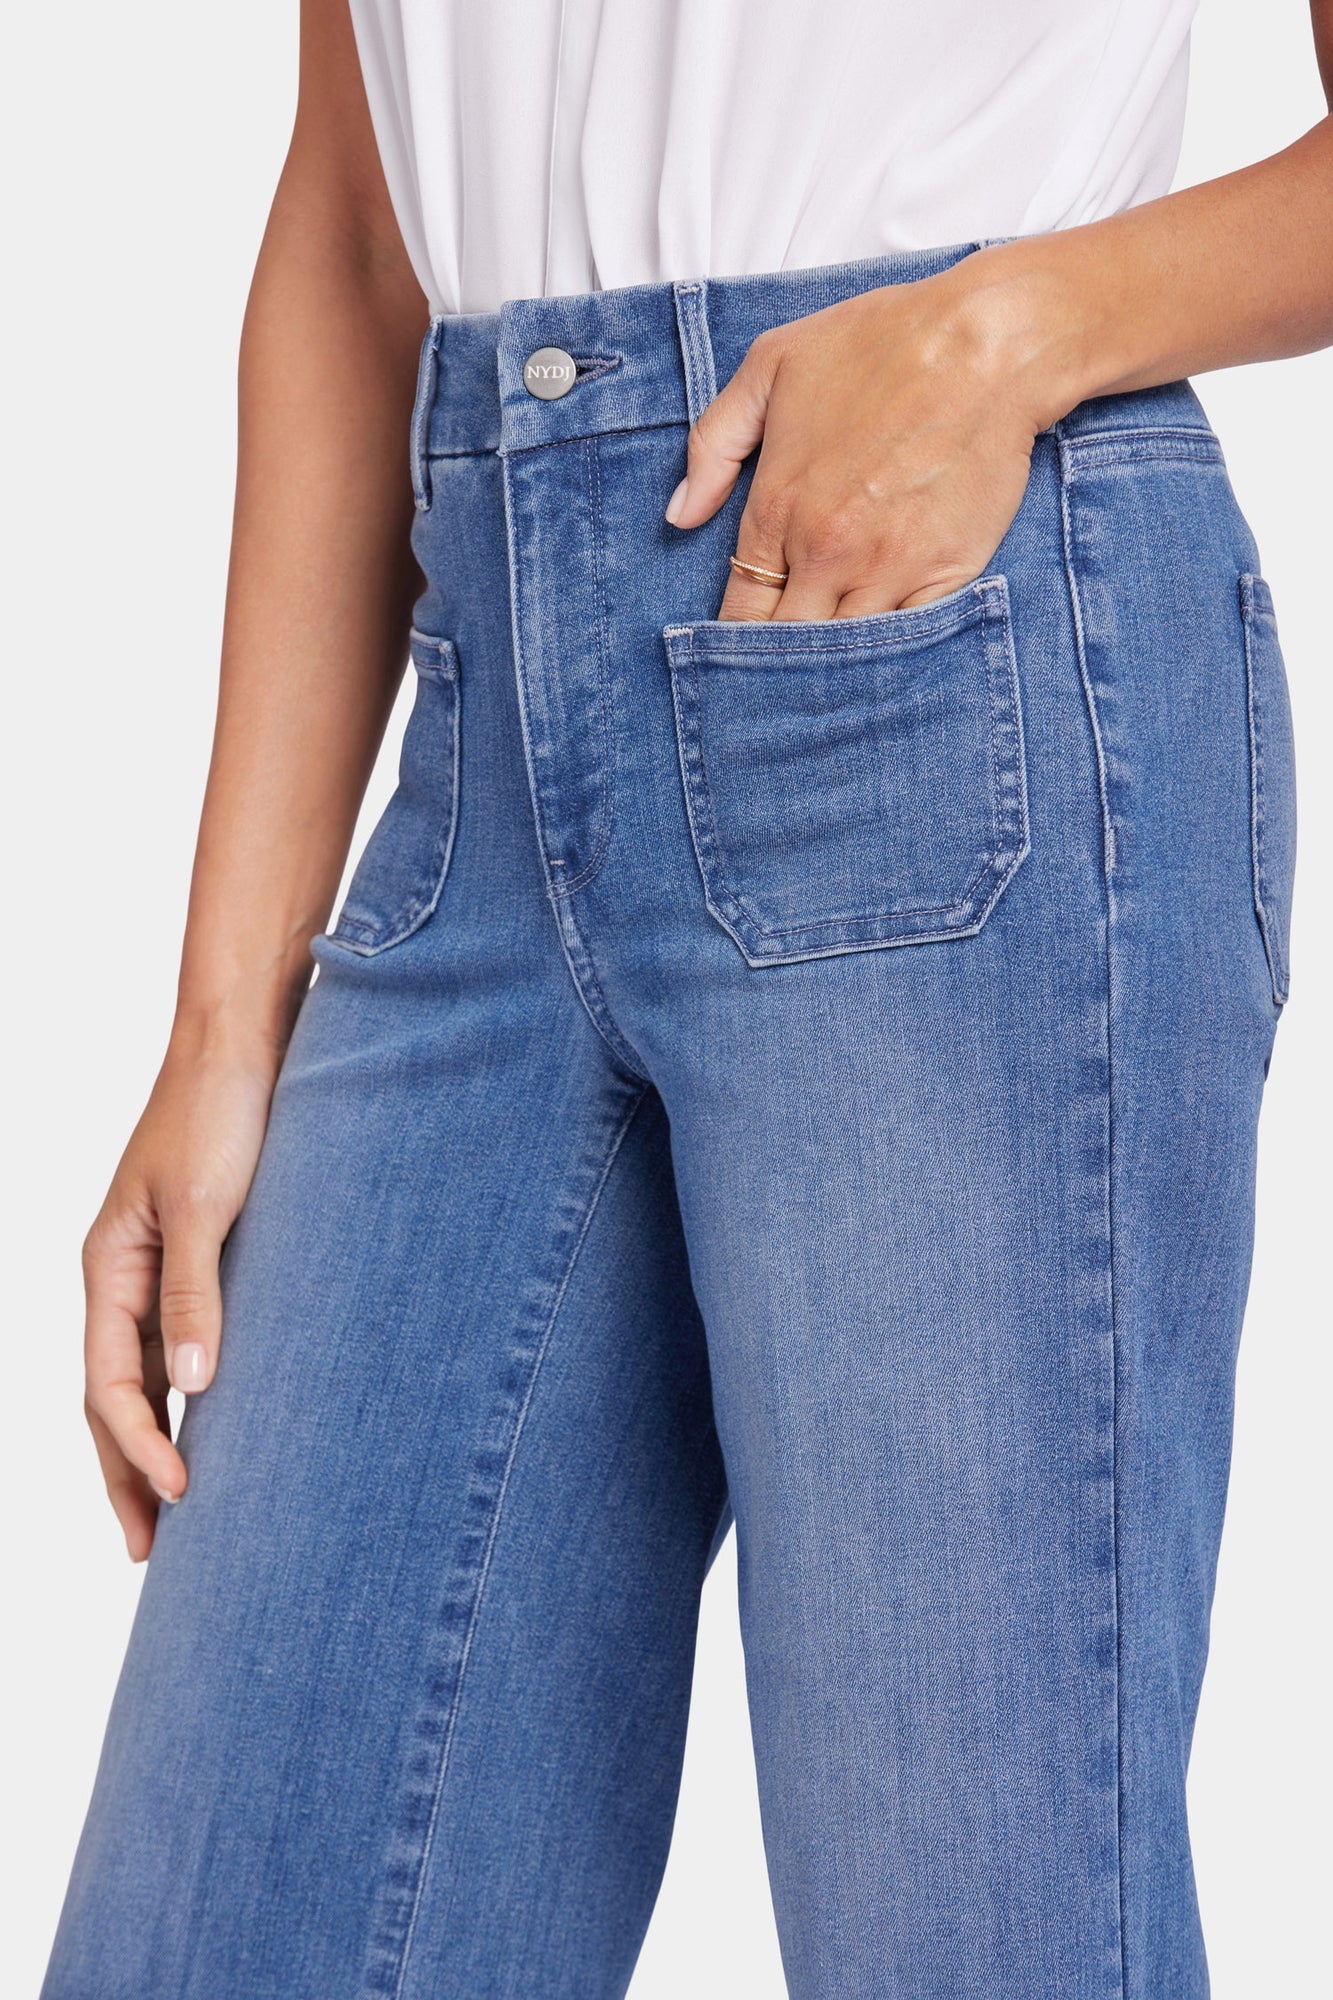 NYDJ Patchie Wide Leg Capri Jeans With Frayed Hems - Compass